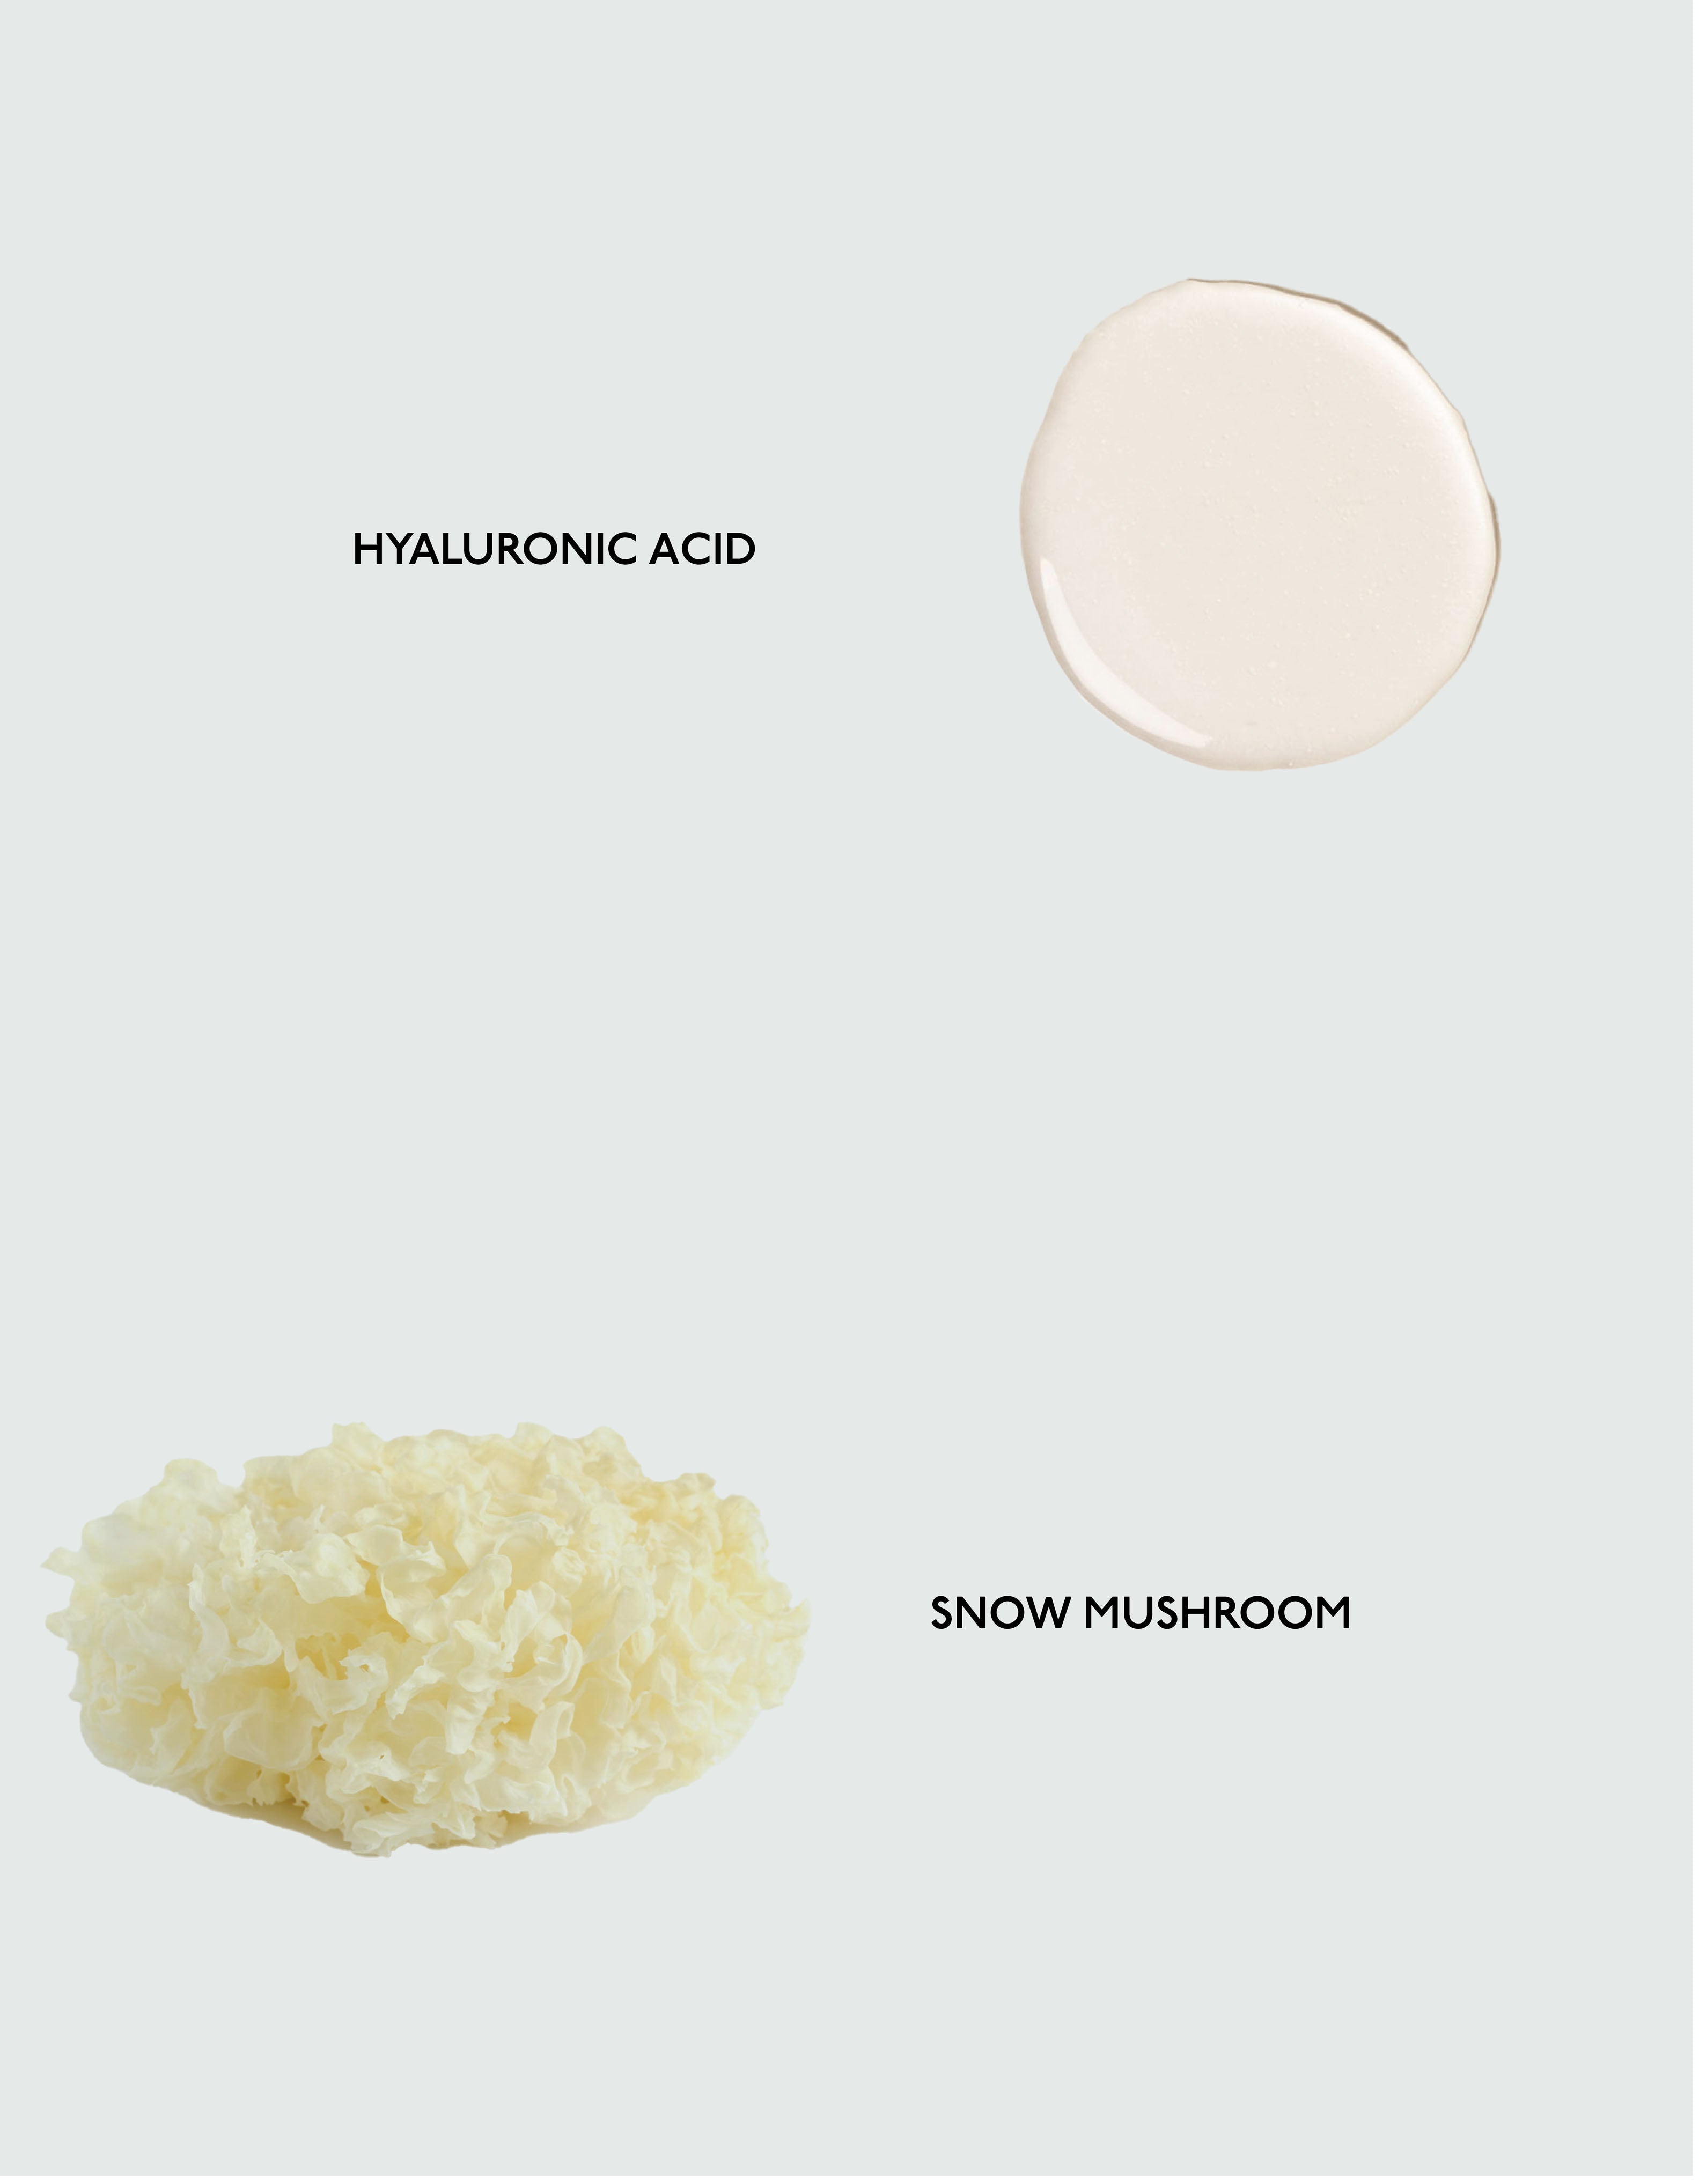 The image showcases two key ingredients from Cozy Earth's Body Serum against a light grey background. At the top, there is a dollop of white hyaluronic acid, and below it lies a cream-colored snow mushroom with a frilly texture. Both ingredients are clearly labeled: "Hyaluronic Acid" and "Snow Mushroom.